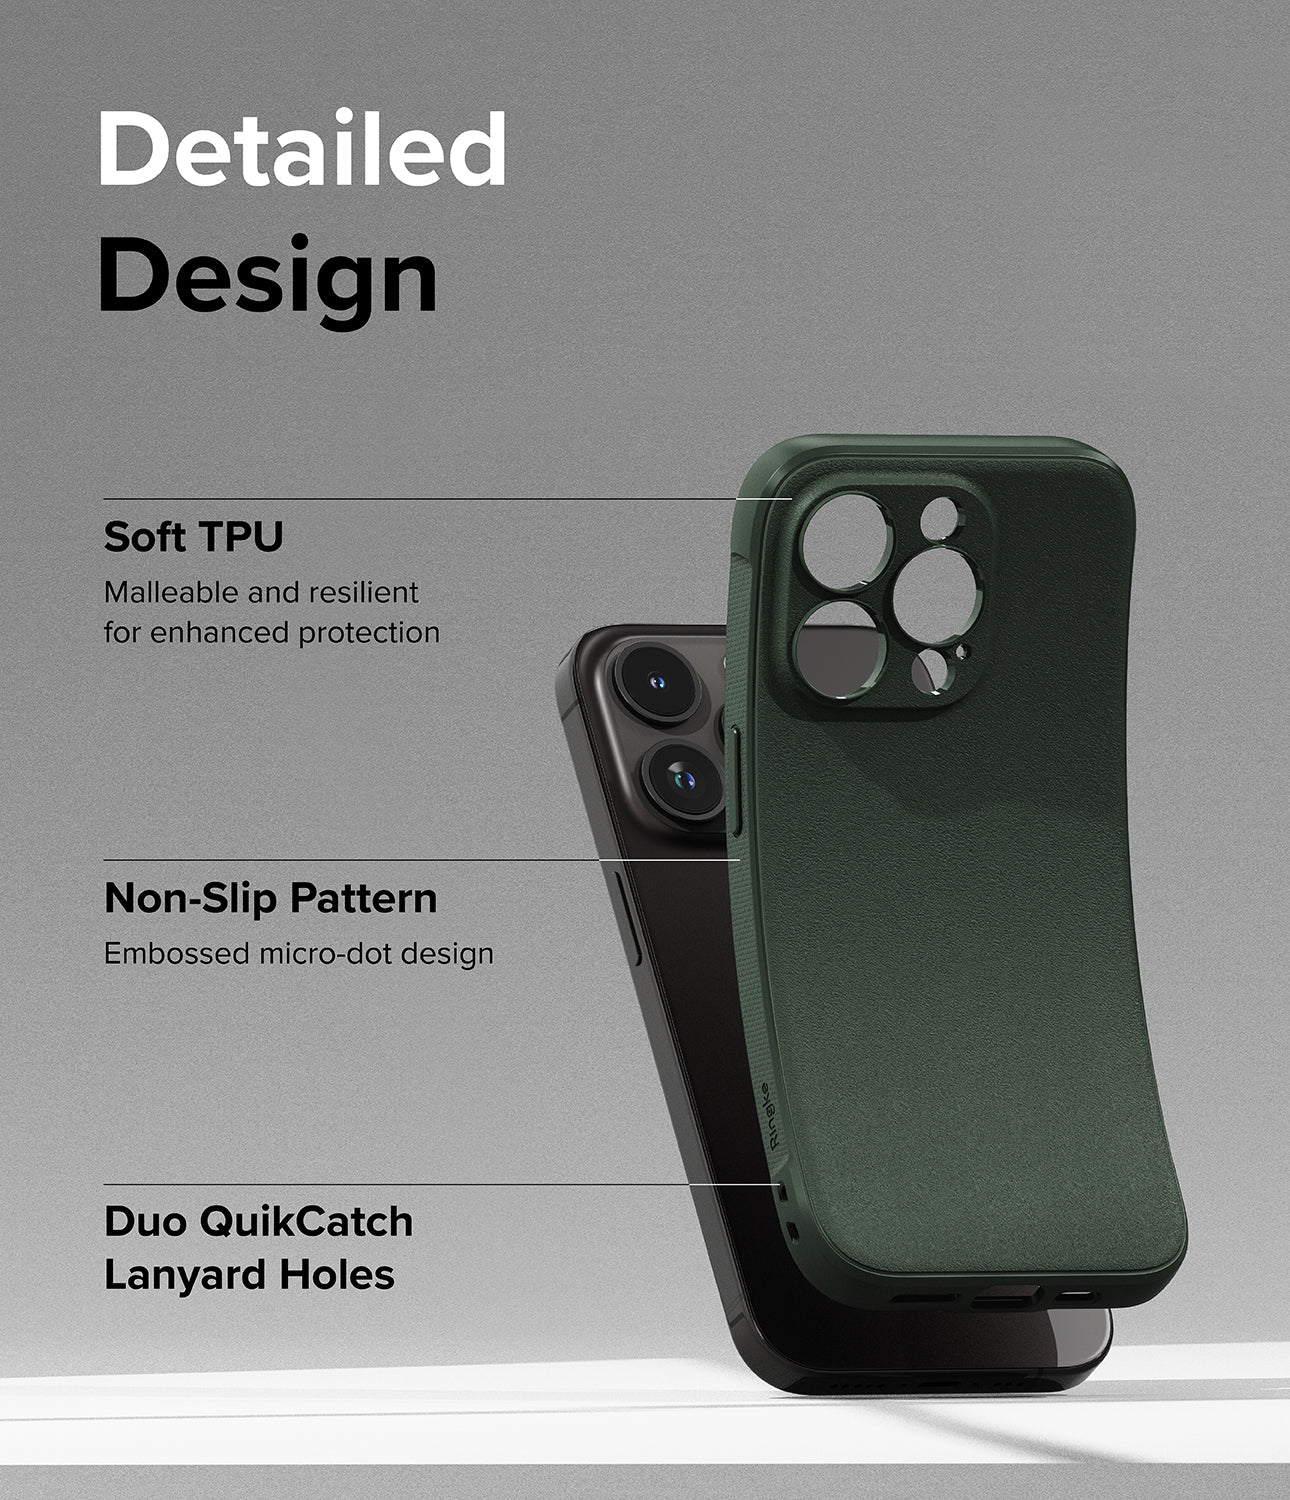 iPhone 15 Pro Max Case | Onyx - Dark Green - Detailed Design. Malleable and resilient for enhanced protection with Soft TPU. Embossed micro-dot design with Non-Slip Pattern. Duo QuikCatch Lanyard Holes.